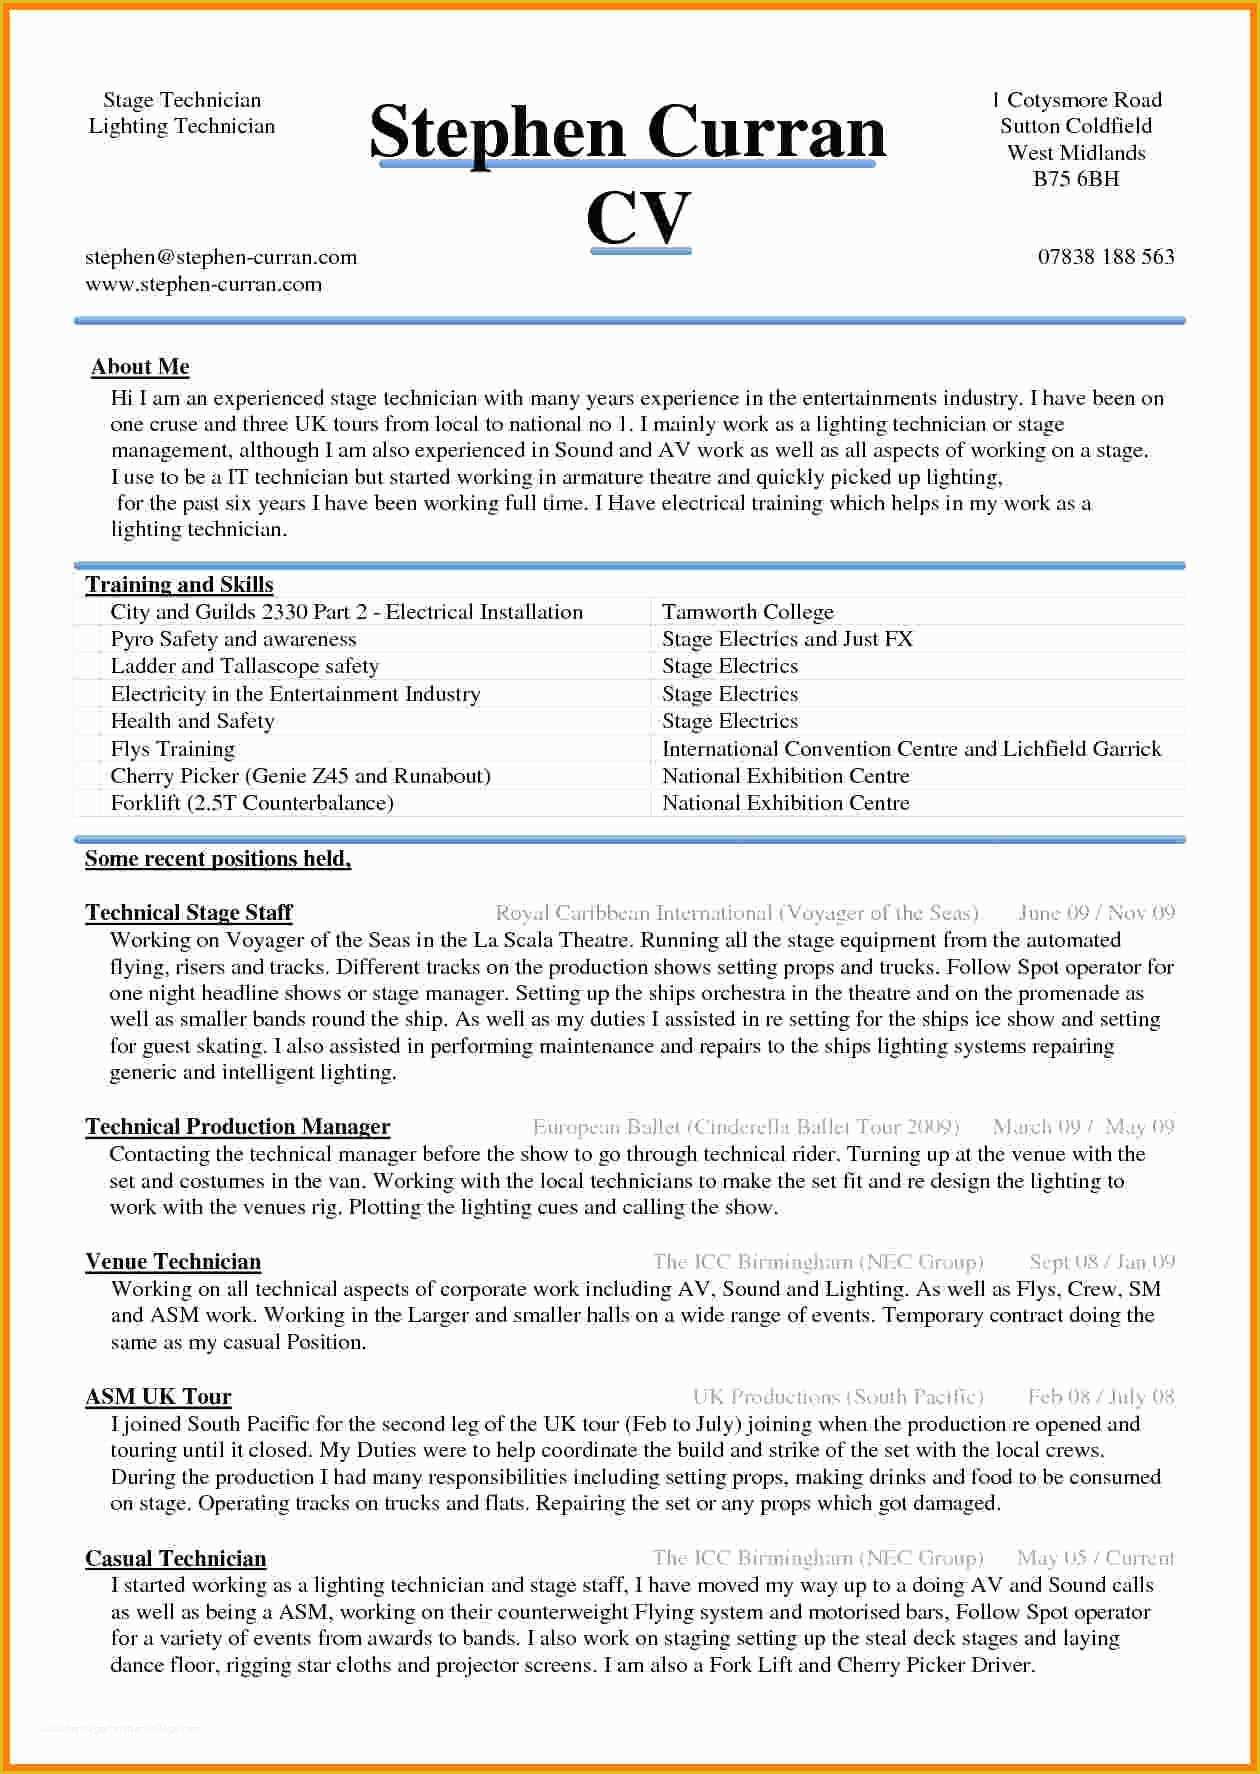 cv-templates-free-download-word-document-of-5-cv-sample-word-document-heritagechristiancollege